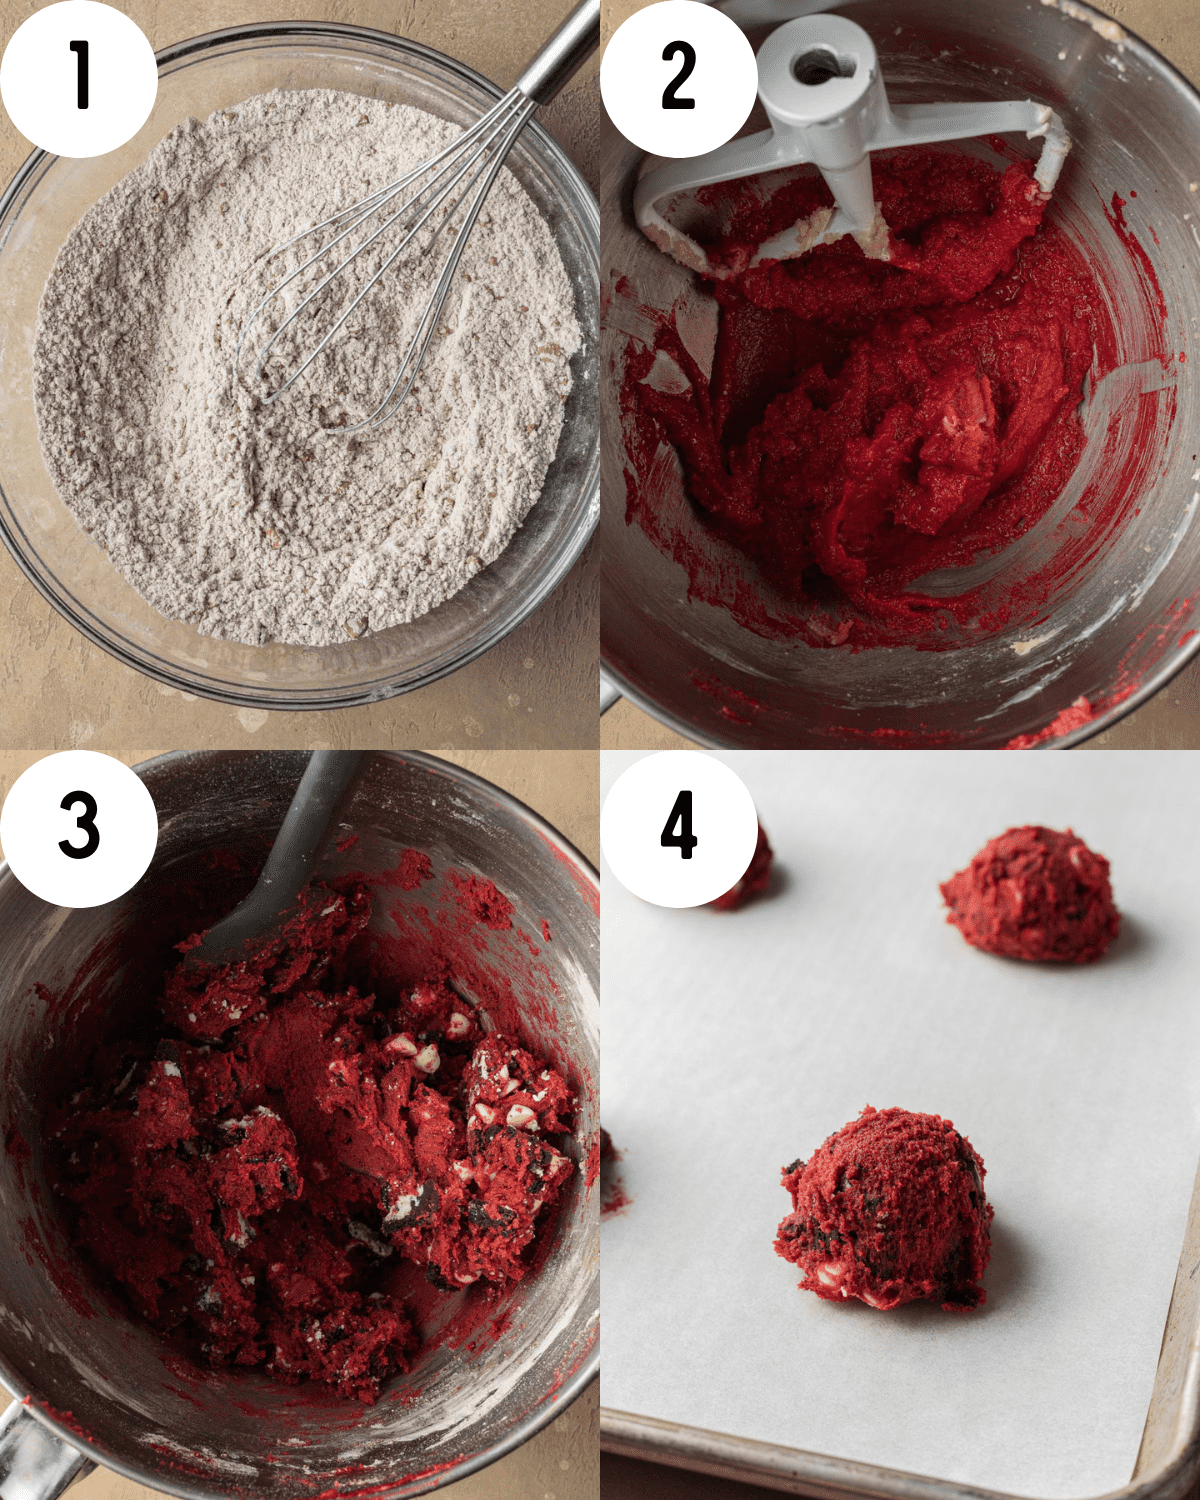 Steps on how to make Red Velvet Oreo Cookies. 1. Dry ingredients in glass mixing bowl with whisk. 2. Wet ingredients mixed with dry ingredients in silver mixing bowl with flat beater. 3. Cookie dough with oreo and white chocolate chips mixed into the silver mixing bowl with a spatula. 4. Cookie dough balls laid out on baking sheet that is lined with parchment paper.